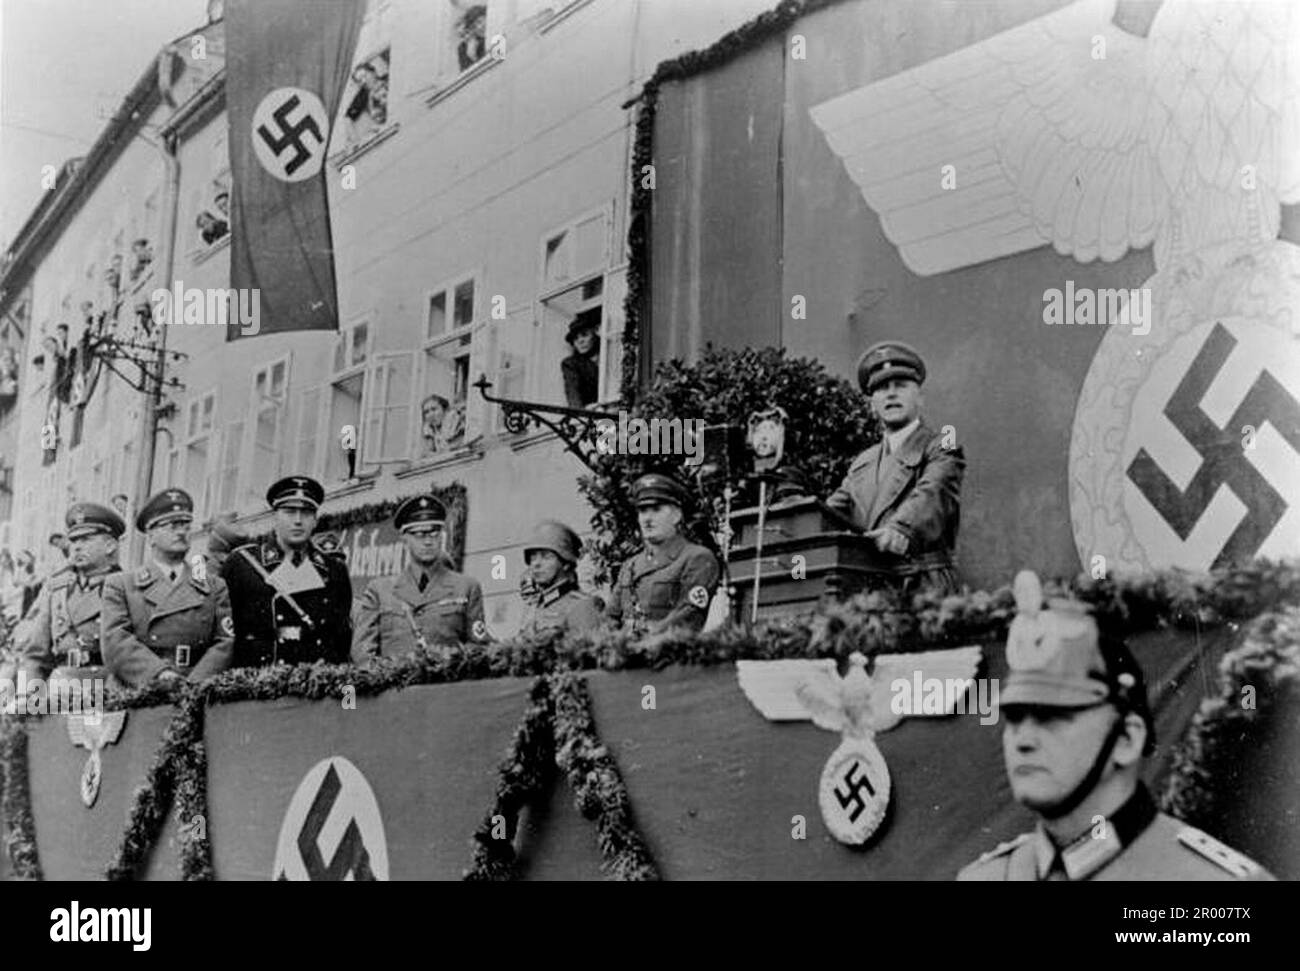 The nazi minister of the Interior Wilhelm Frick speaking during an official visit from a swastika bedecked platform in Czechoslovakia after the annexation of the Sudetenland. After the annexation of Austria, Hitler demanded that he be given the Sudeten region of Czechoslovakia. At the Munich conference in September 1938 the Western powers agreed to this and the nazis occupied the area. Not long after Hitler broke his promise and invaded the rest of Czechoslovakia before turning his attention to Poland. Bundesarchiv, Bild 121-0018 / CC-BY-SA 3.0 Stock Photo